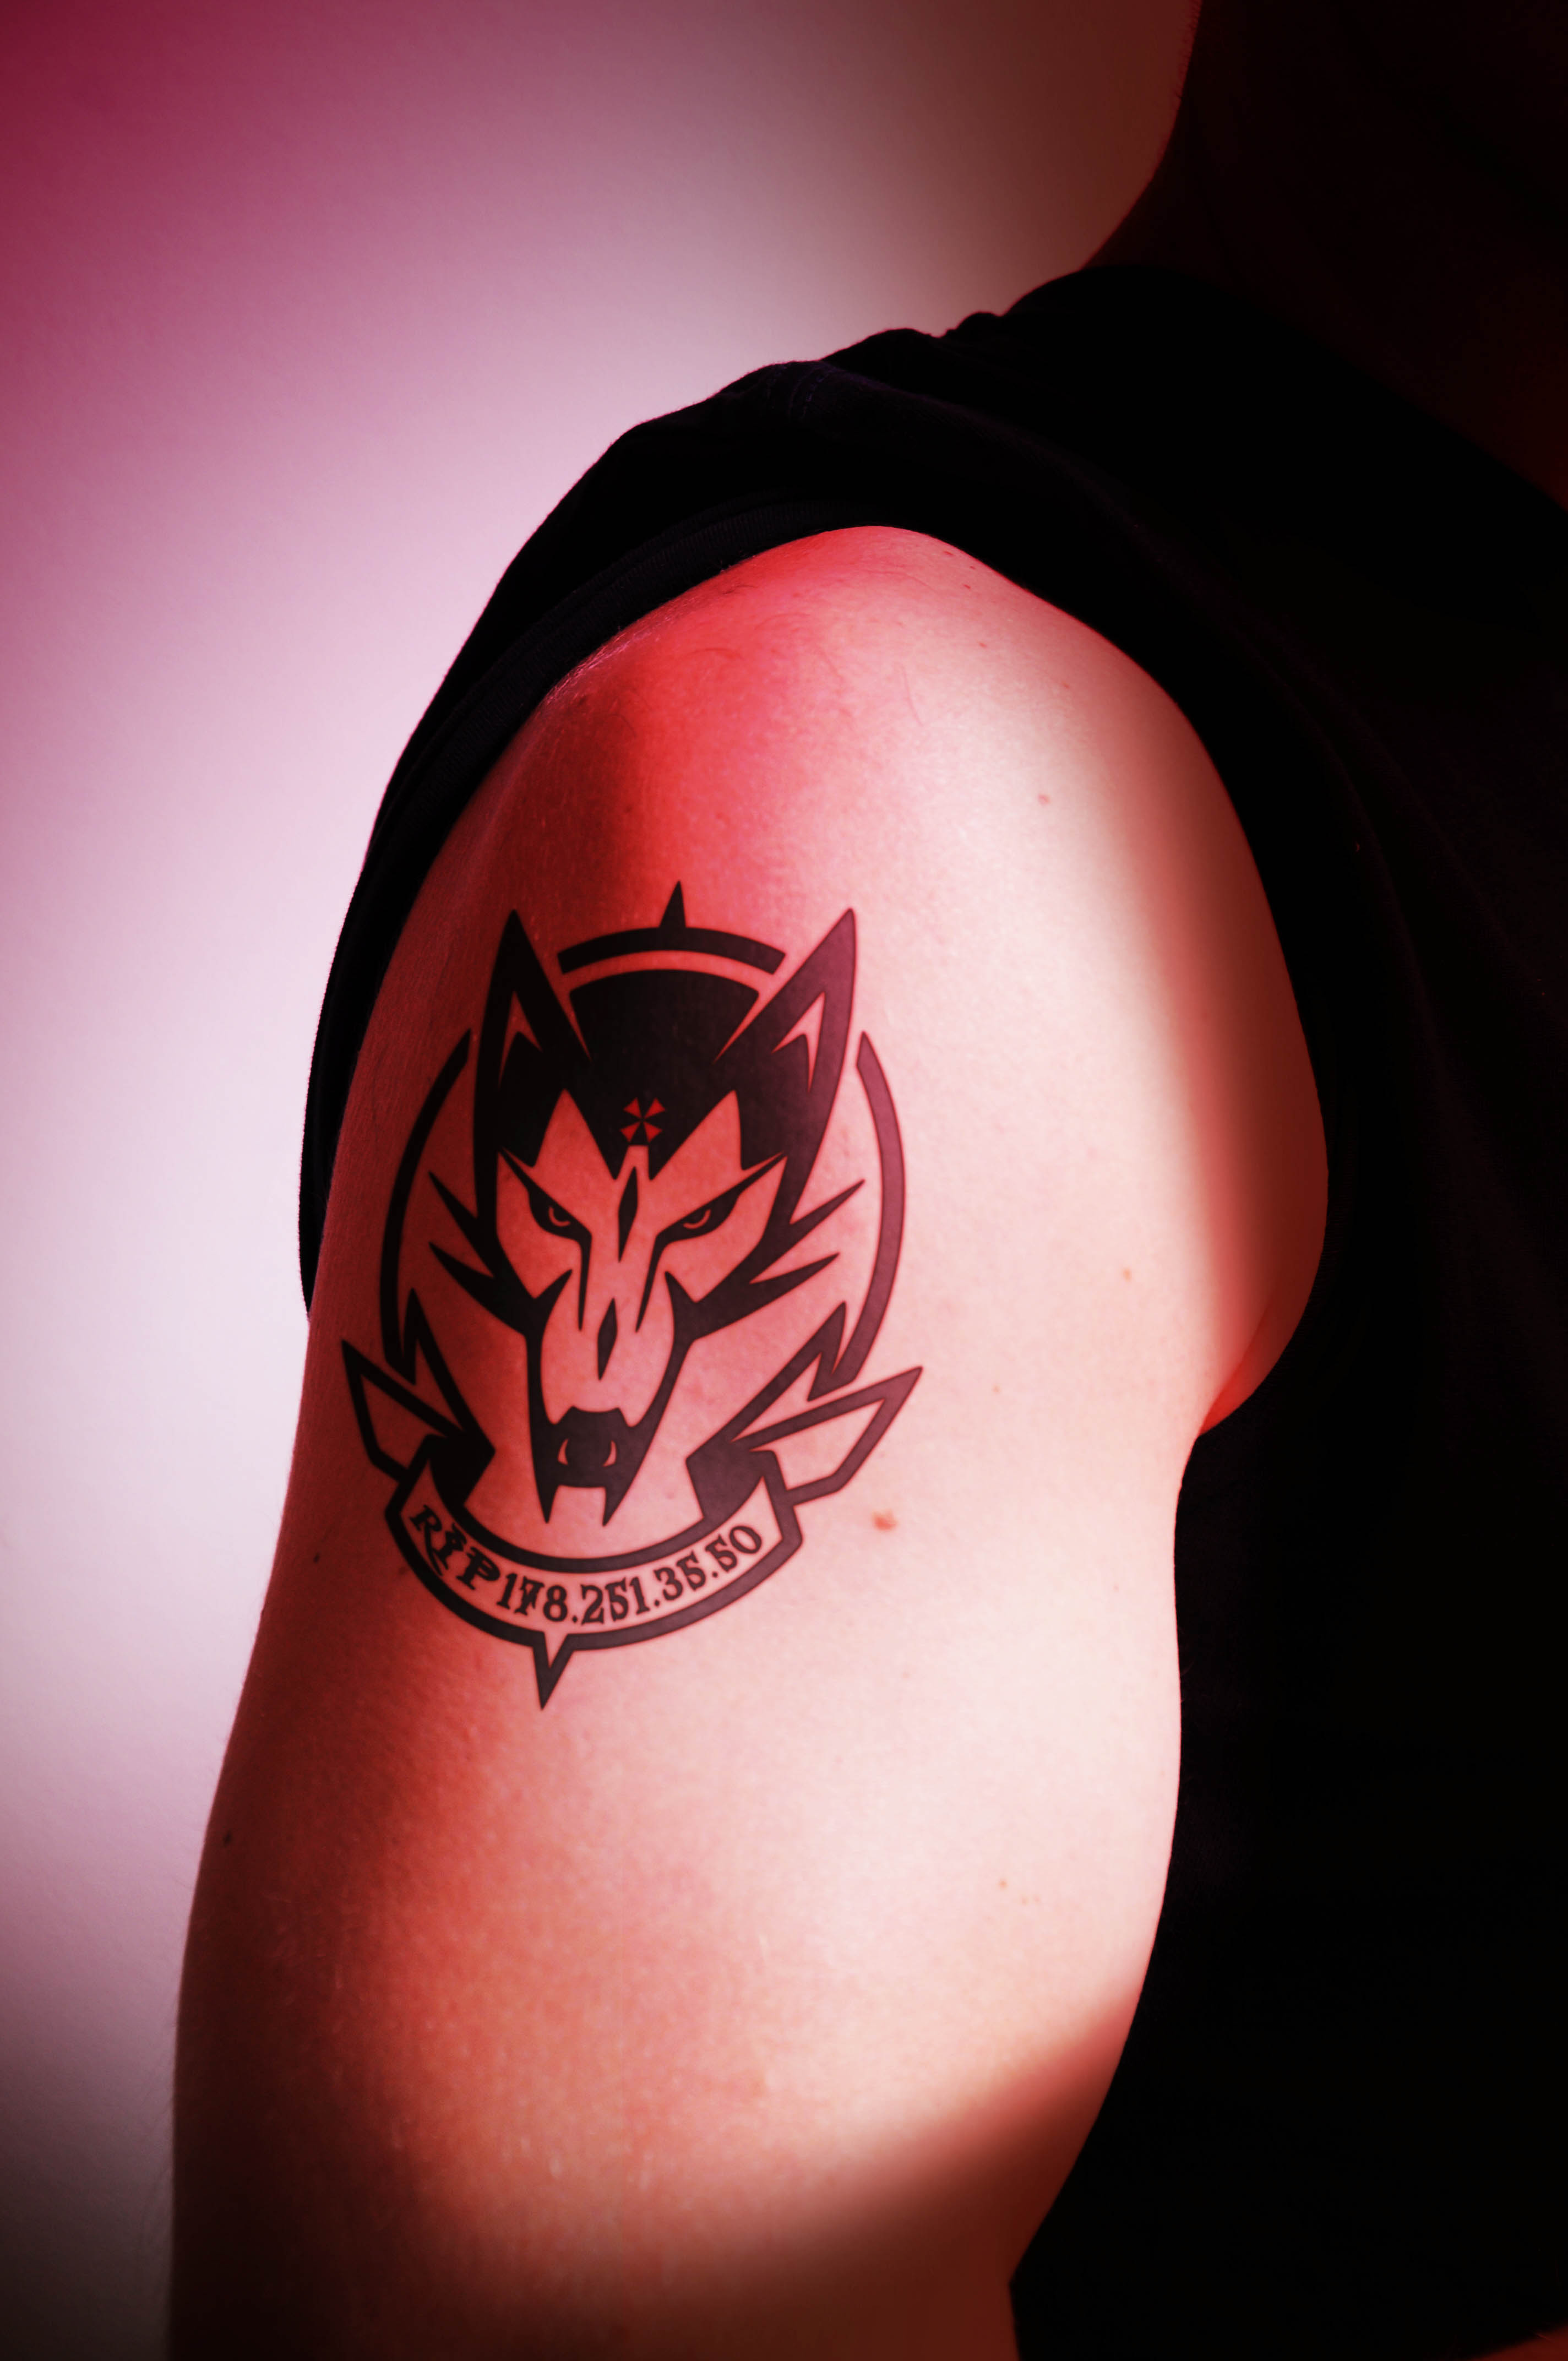 Raccoon City Tattoo - Resident Evil Wiki - The Resident ...